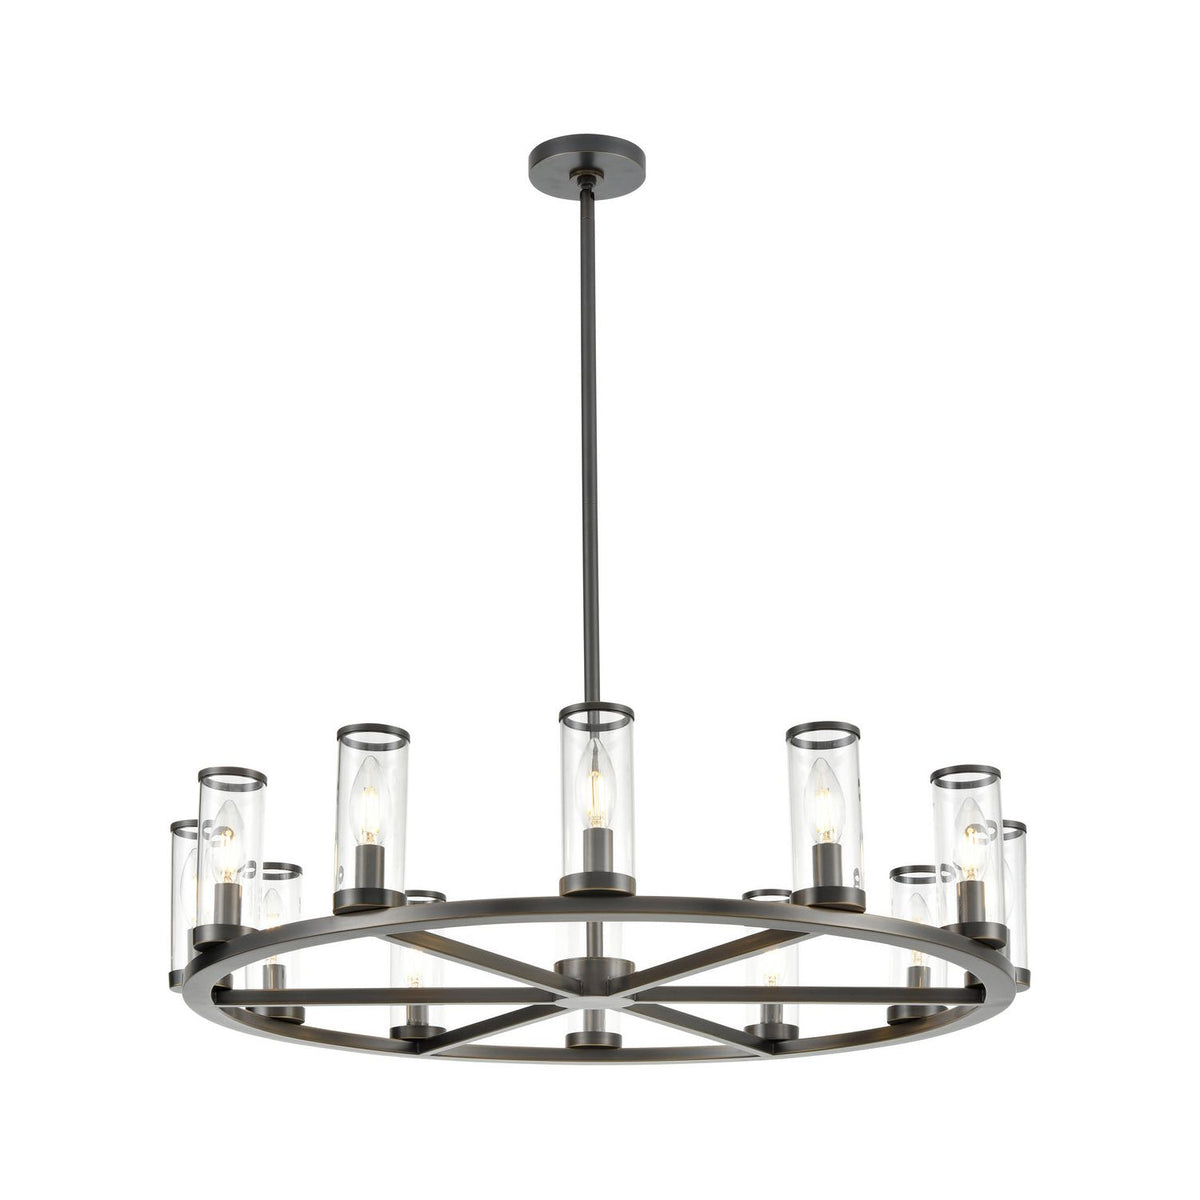 Alora Lighting - CH309012UBCG - 12 Light Chandelier - Revolve - Clear Glass/Natural Brass|Clear Glass/Polished Nickel|Clear Glass/Urban Bronze